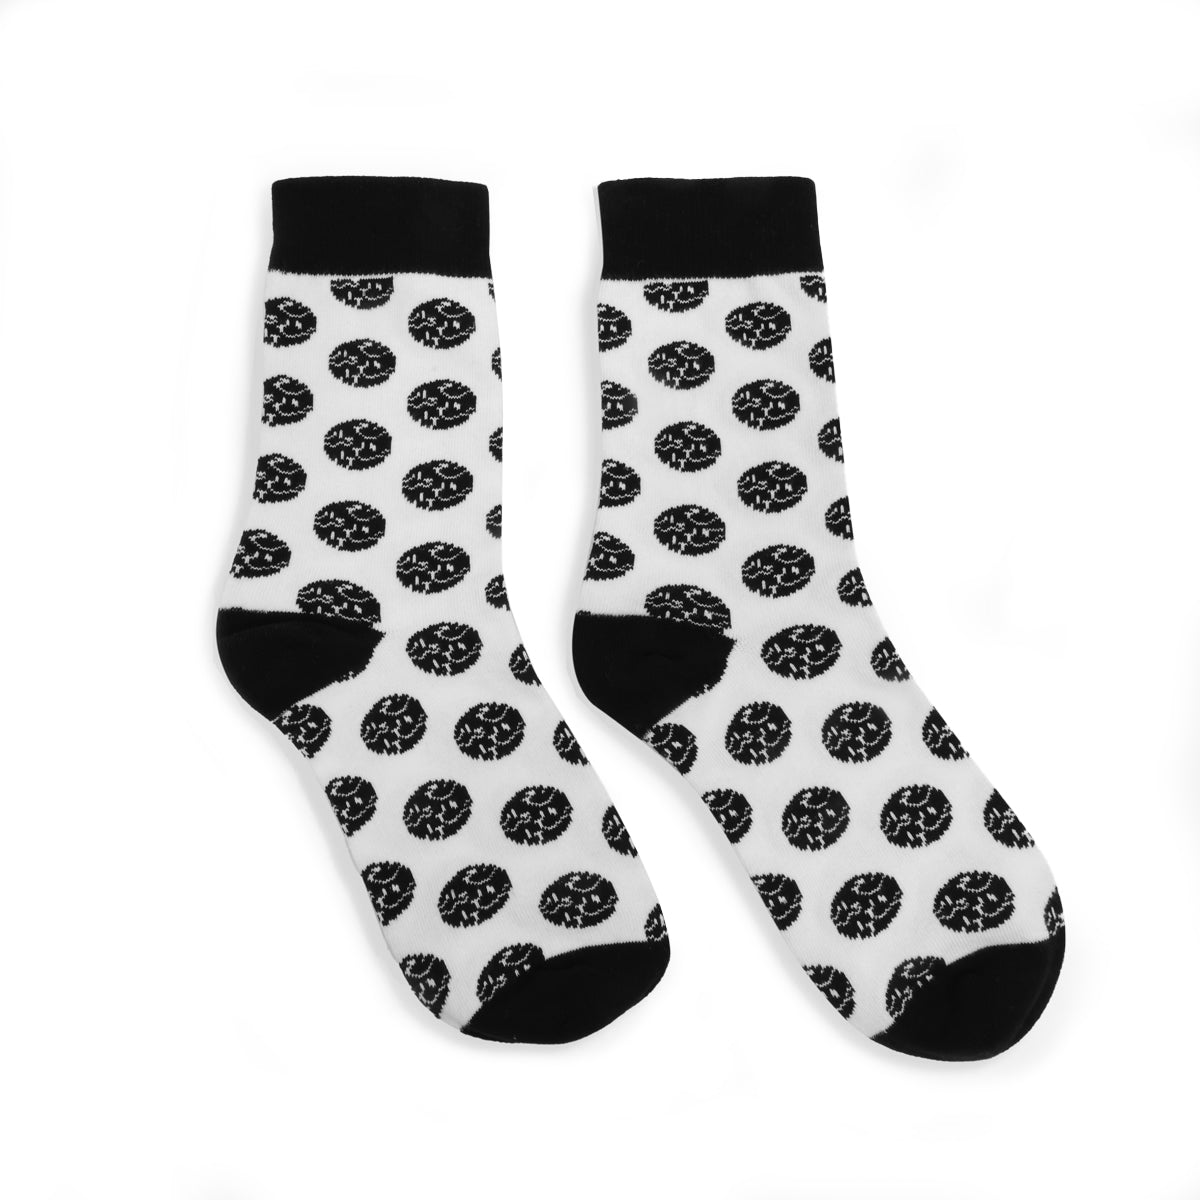 Melting Jellies Socks - Accessories - KOI Footwear - White - Front View